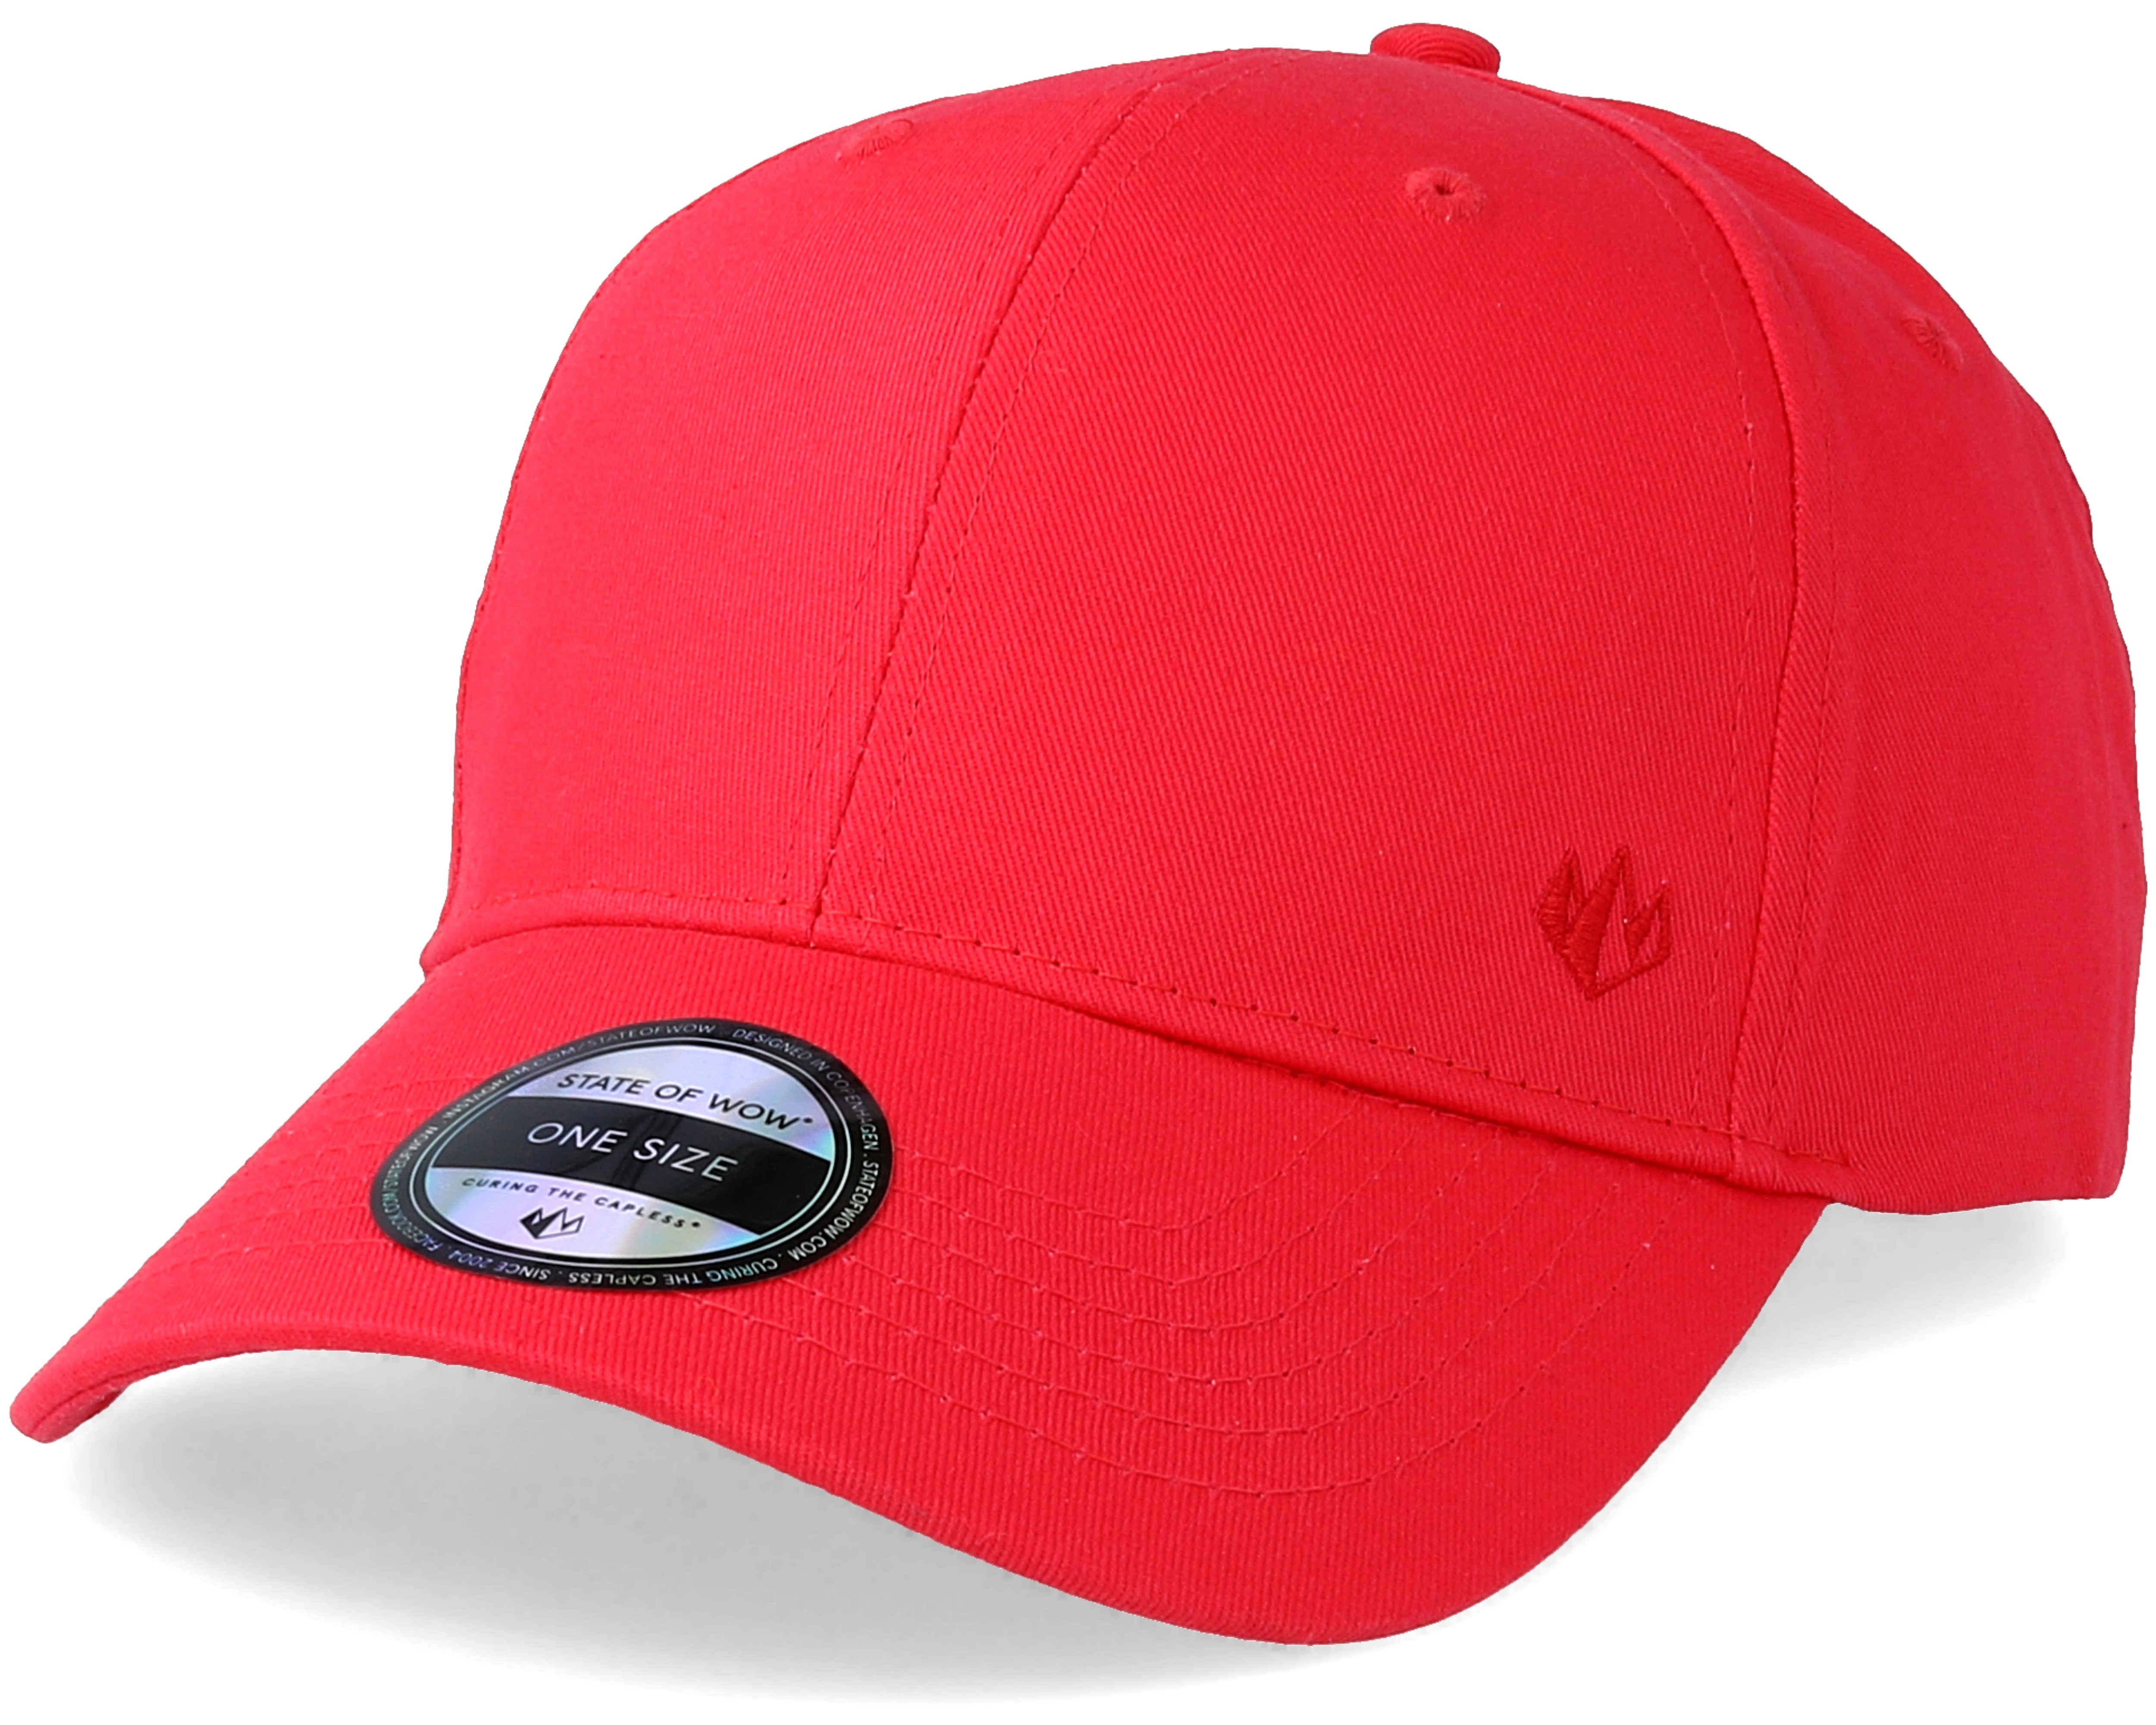 Wolf Baseball Cap Red Adjustable - State Of Wow caps ...